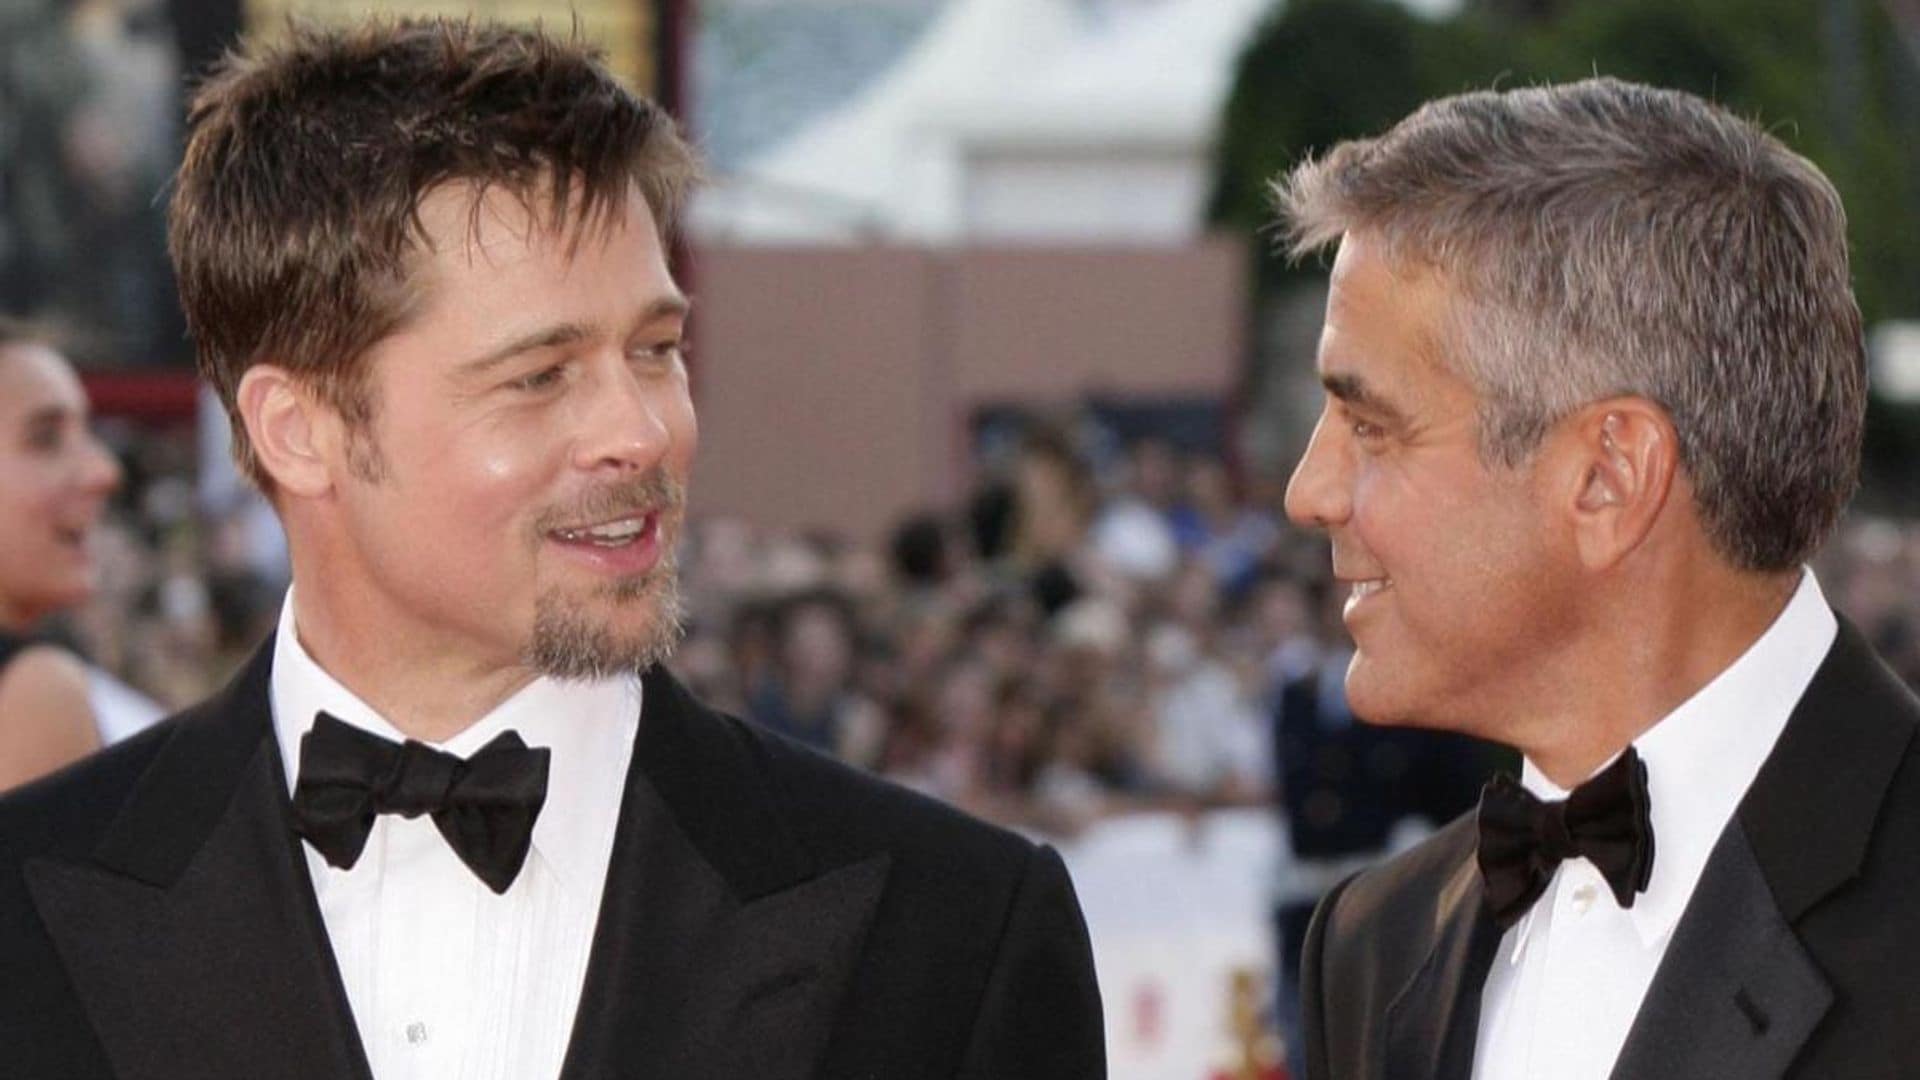 WATCH: Brad Pitt and George Clooney reunite for action-comedy